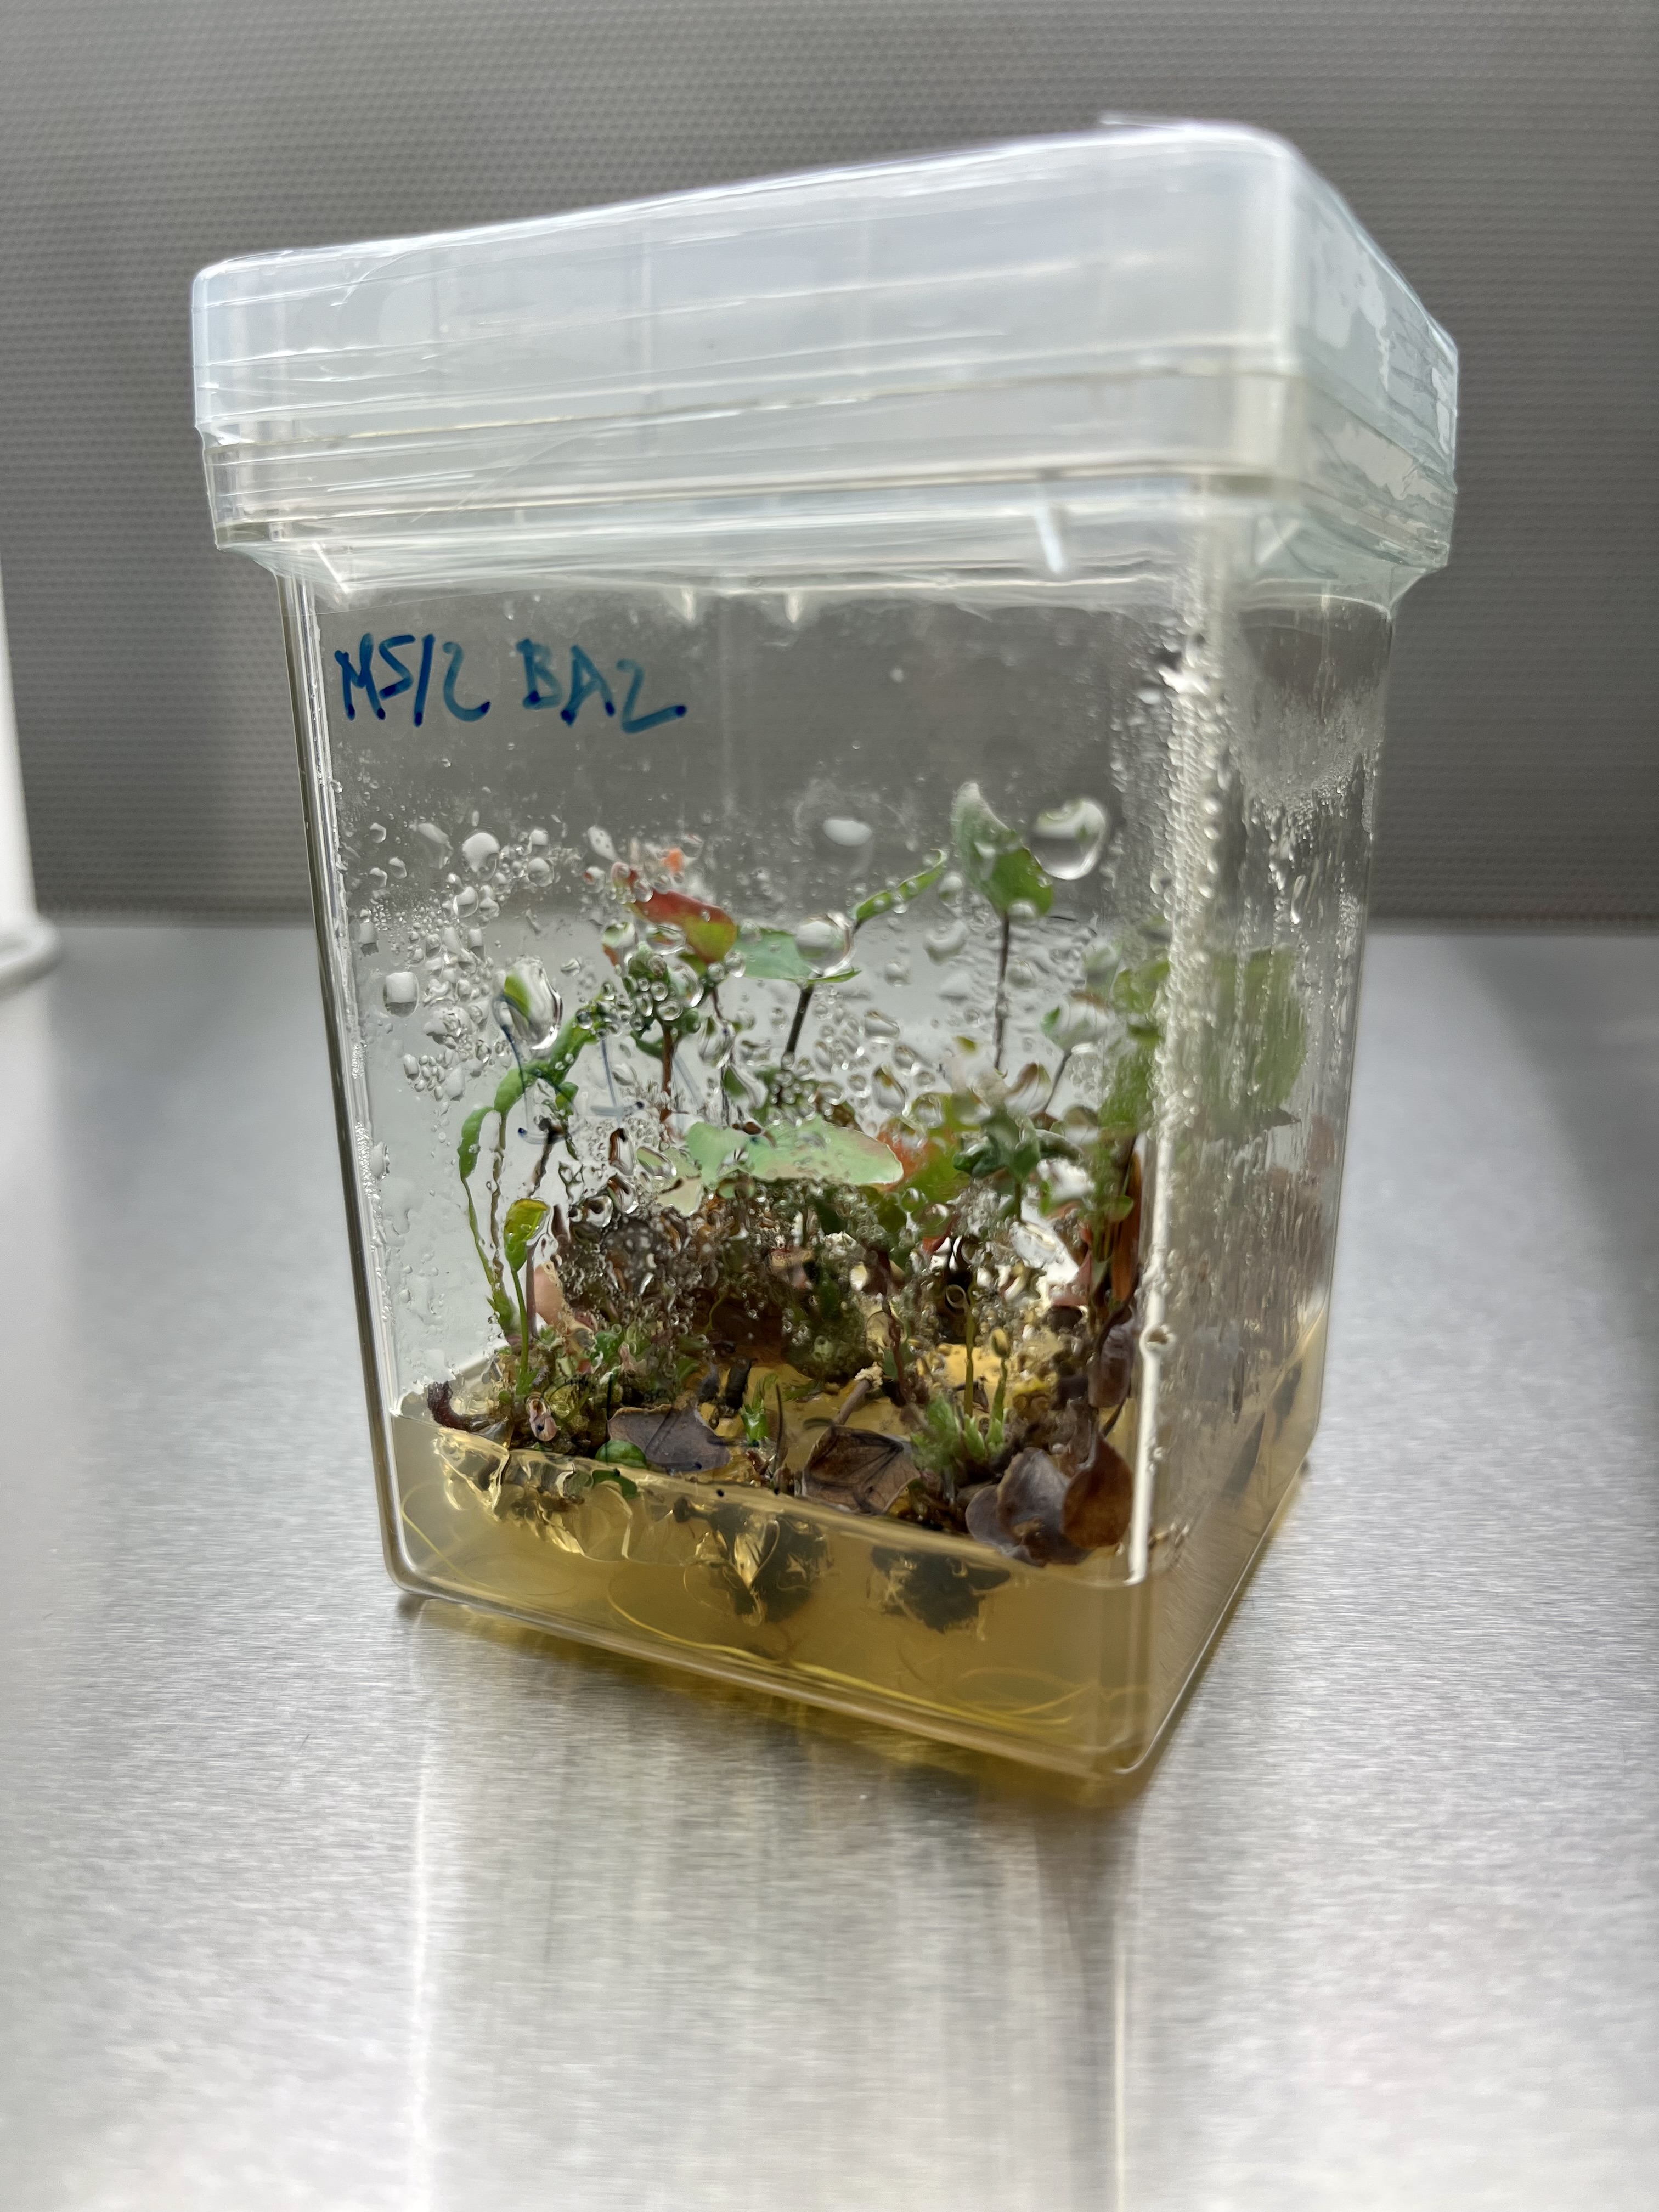 A plant specimen grows in a moist container.